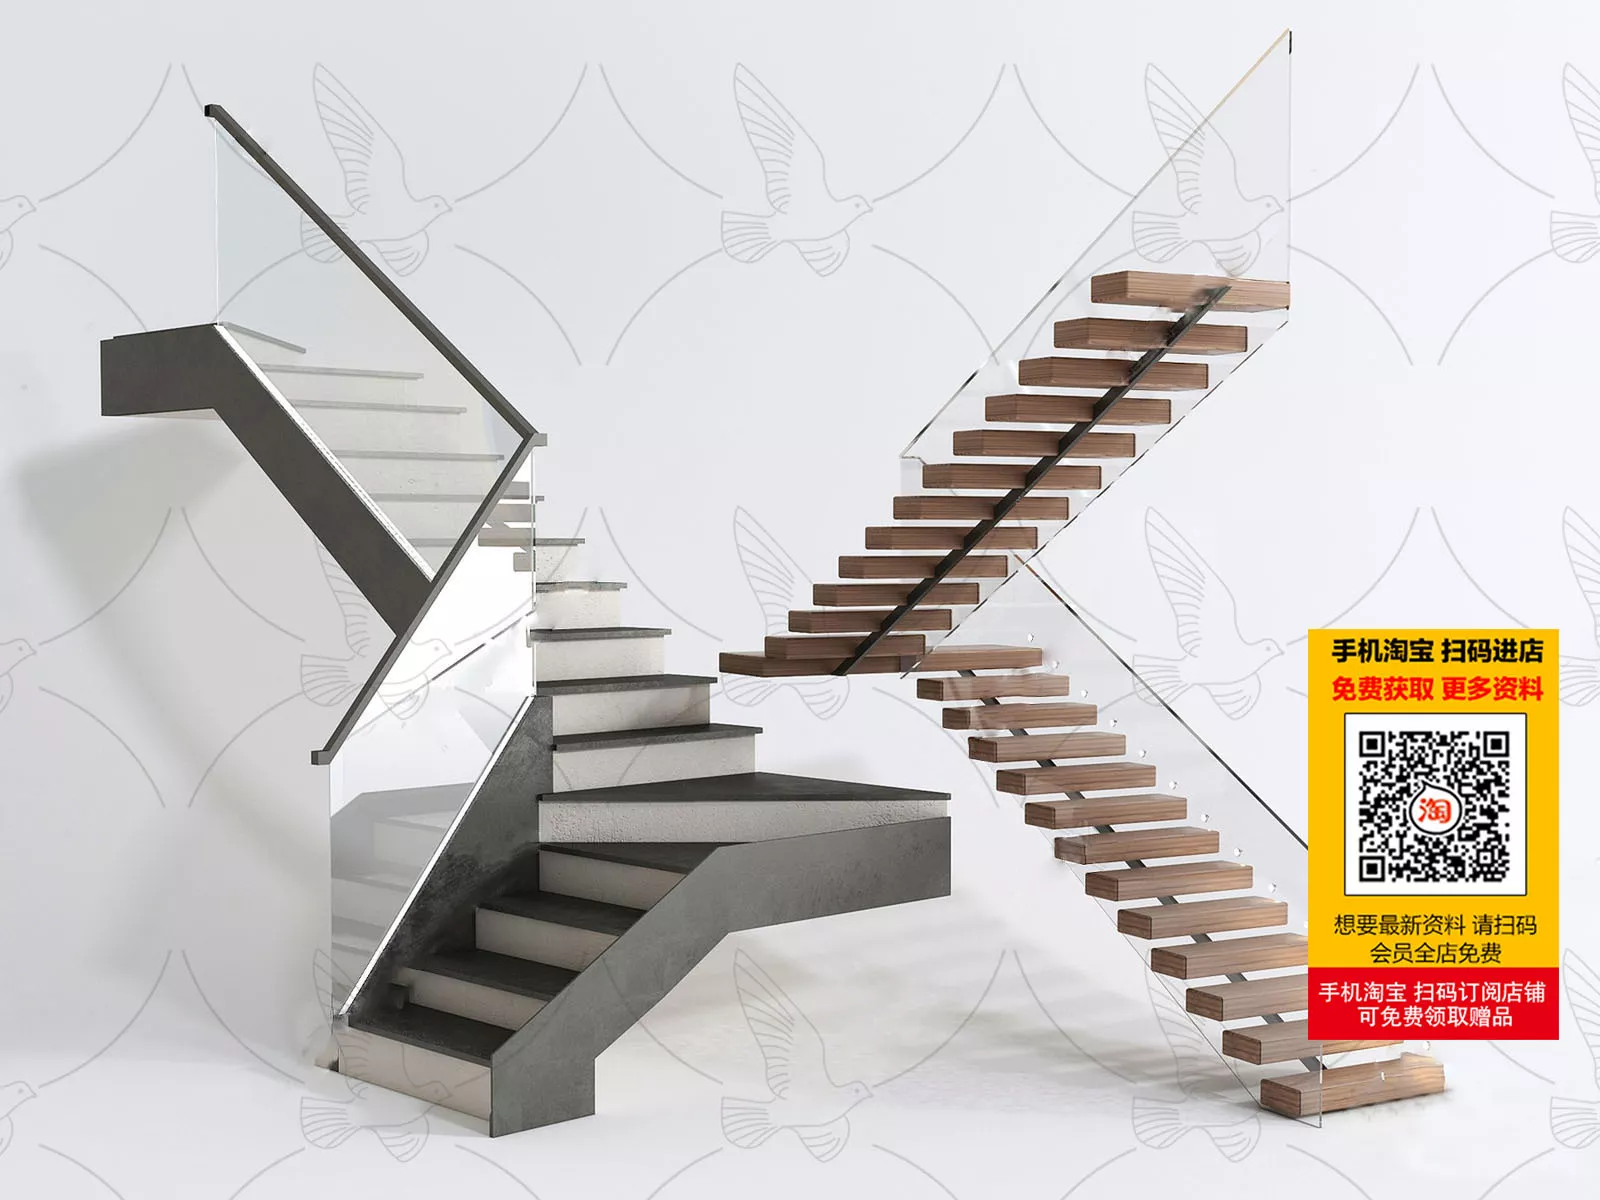 MODERN STAIRS - SKETCHUP 3D MODEL - VRAY OR ENSCAPE - ID14326